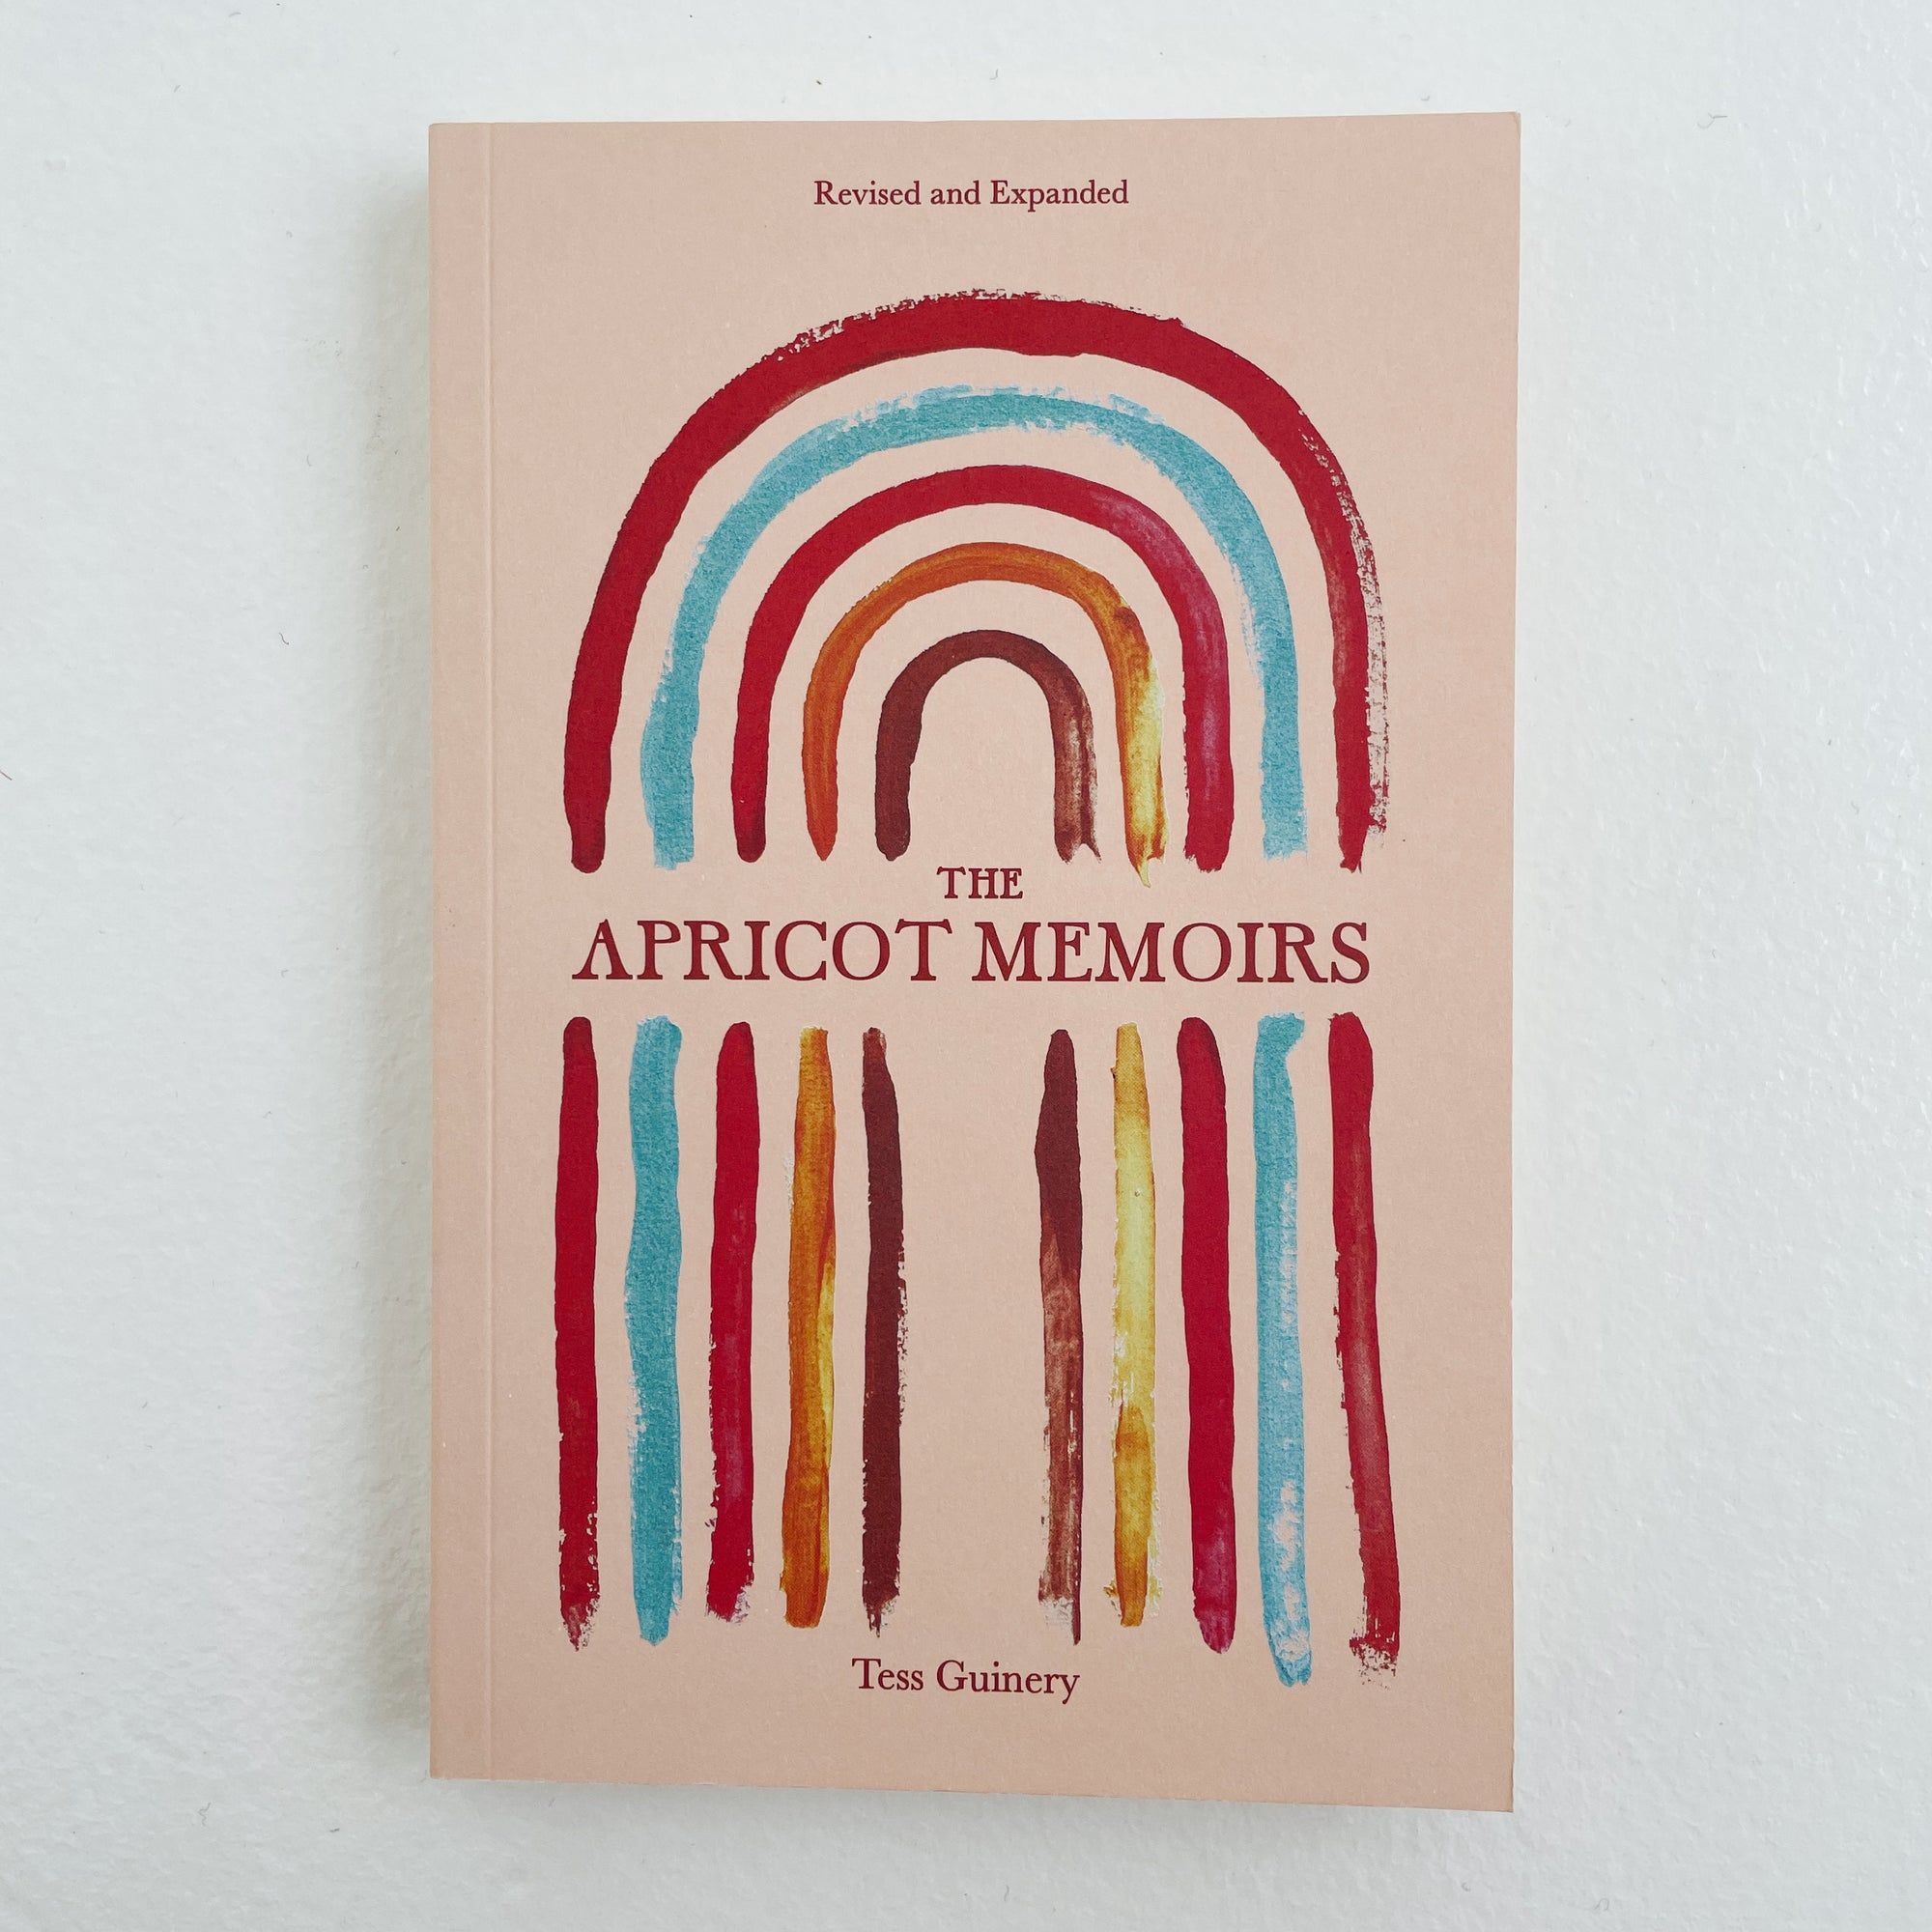 THE APRICOT MEMOIRS BY TESS GUINERY